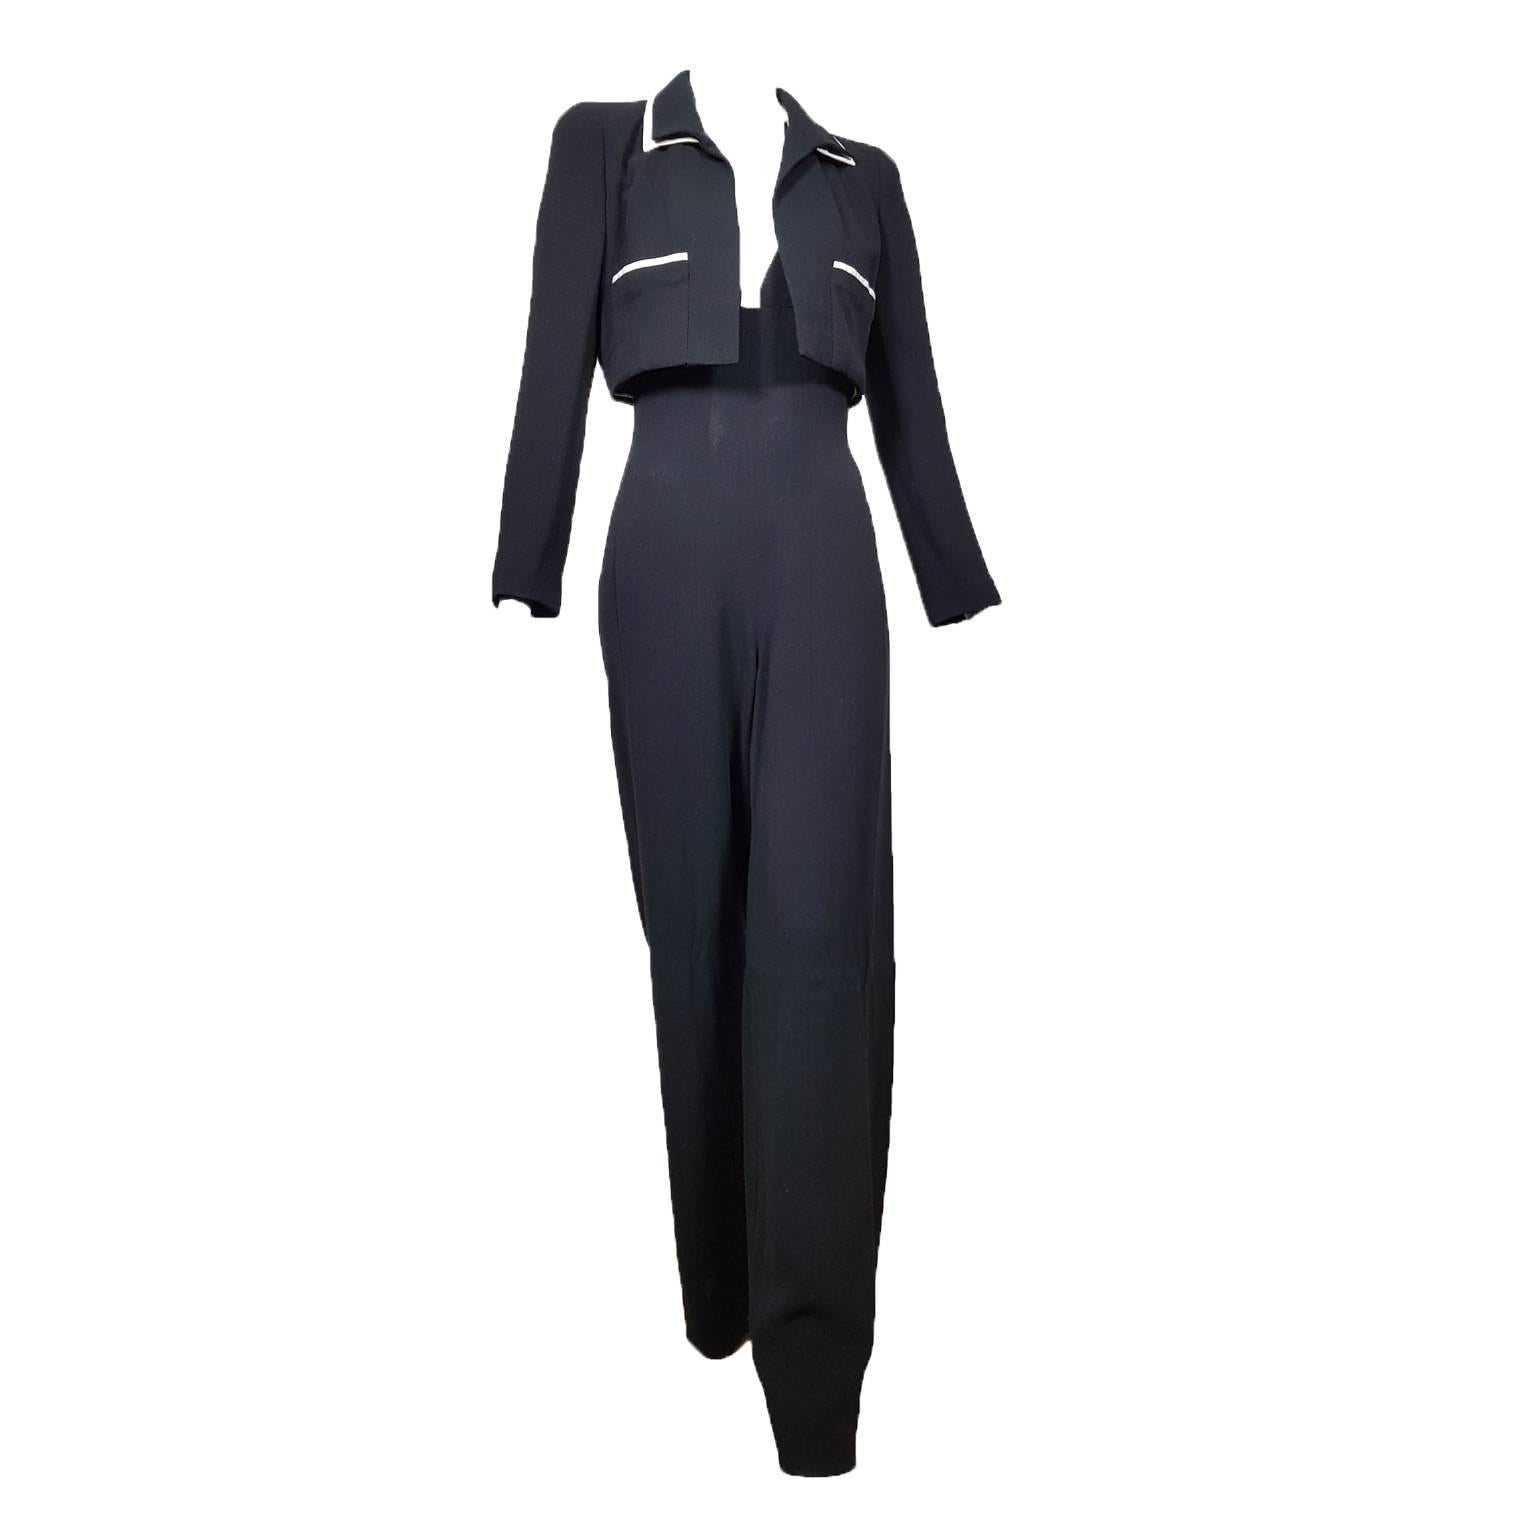 Chanel wide leg jumpsuit with jacket from S/S 1995. 
The short box-shaped jacket futures double collar detail, with CC buttons on the cuffs.
Wide leg overall with white piping detail on the front to the neck, adjustable back bow closure.
With unused